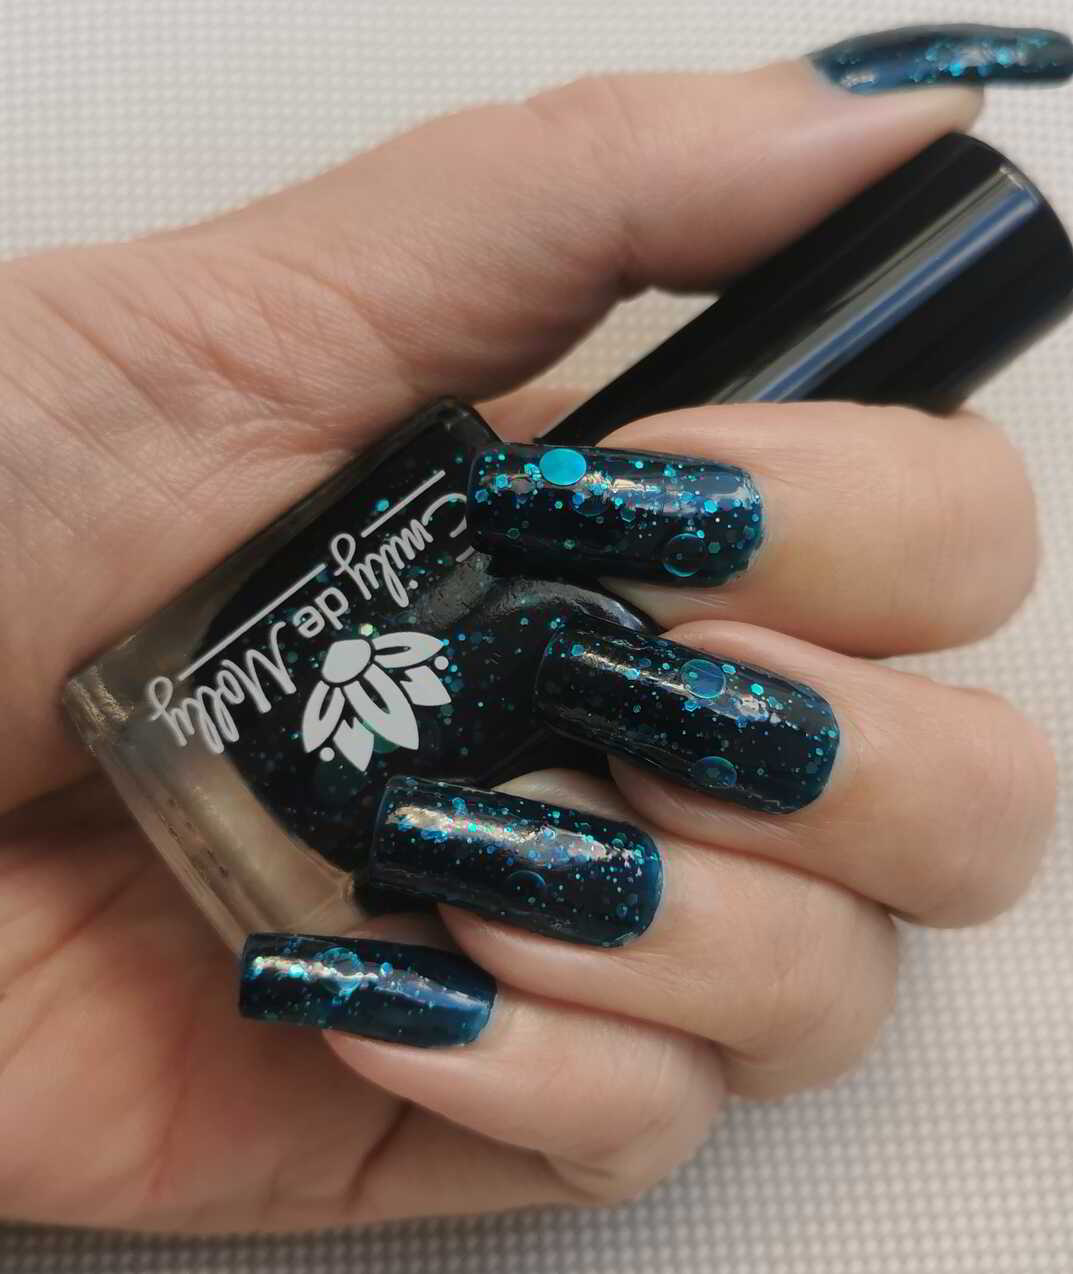 Nail polish manicure of shade Emily de Molly Oceanic Forces, 